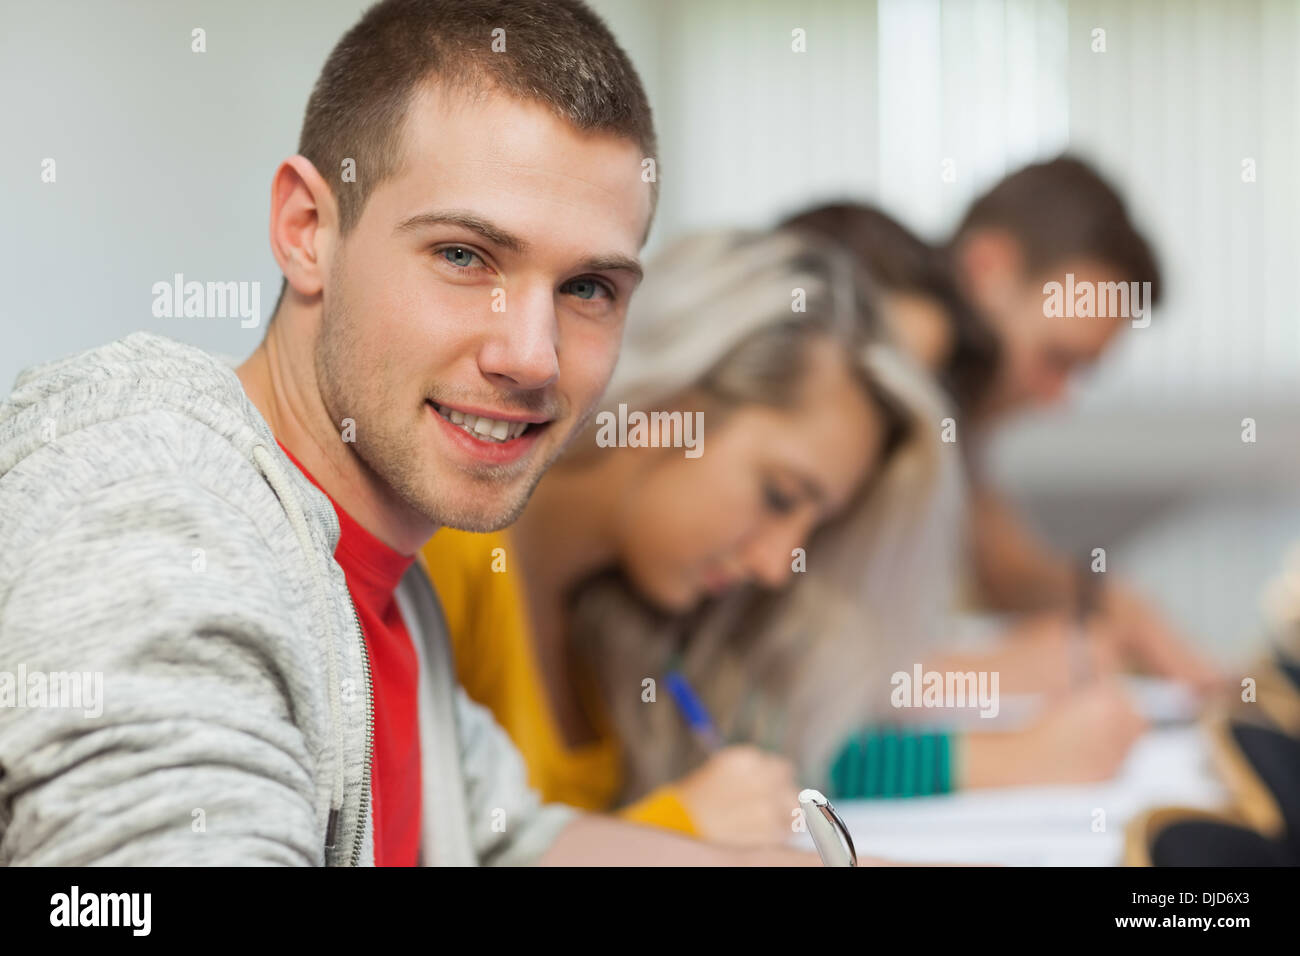 Smiling attractive student looking at camera Stock Photo